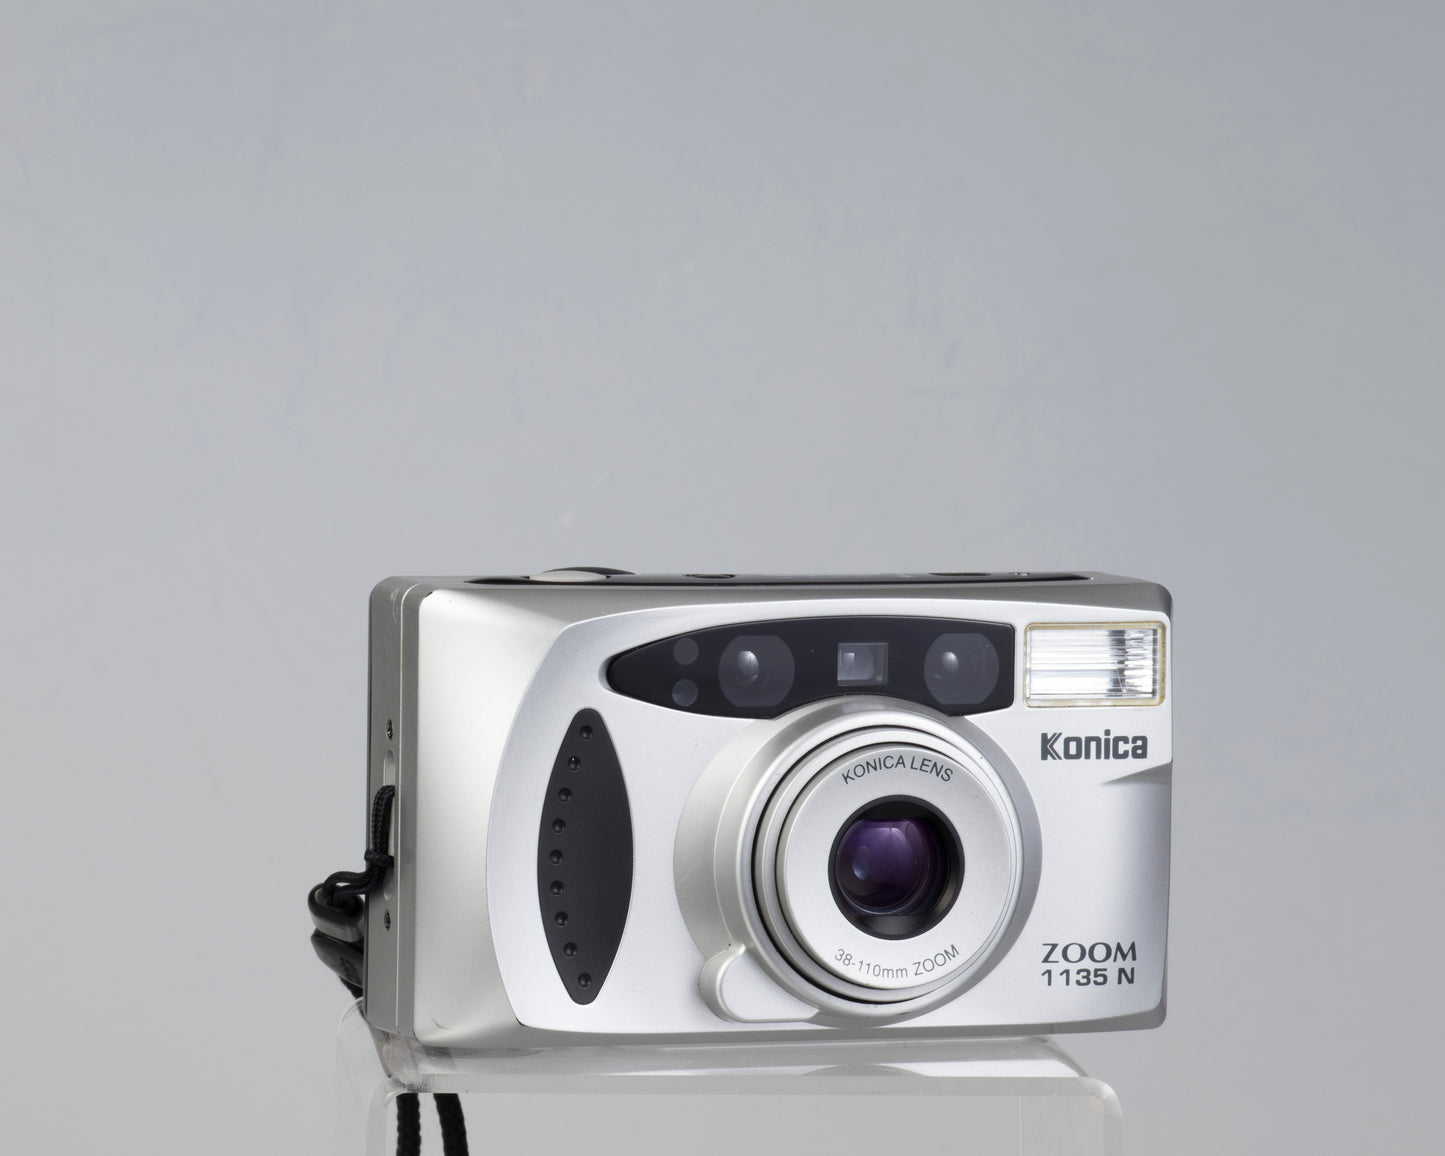 The Konica Zoom 1135 N is a compact 35mm camera that is nearly identical to the better-known Z-up 100VP